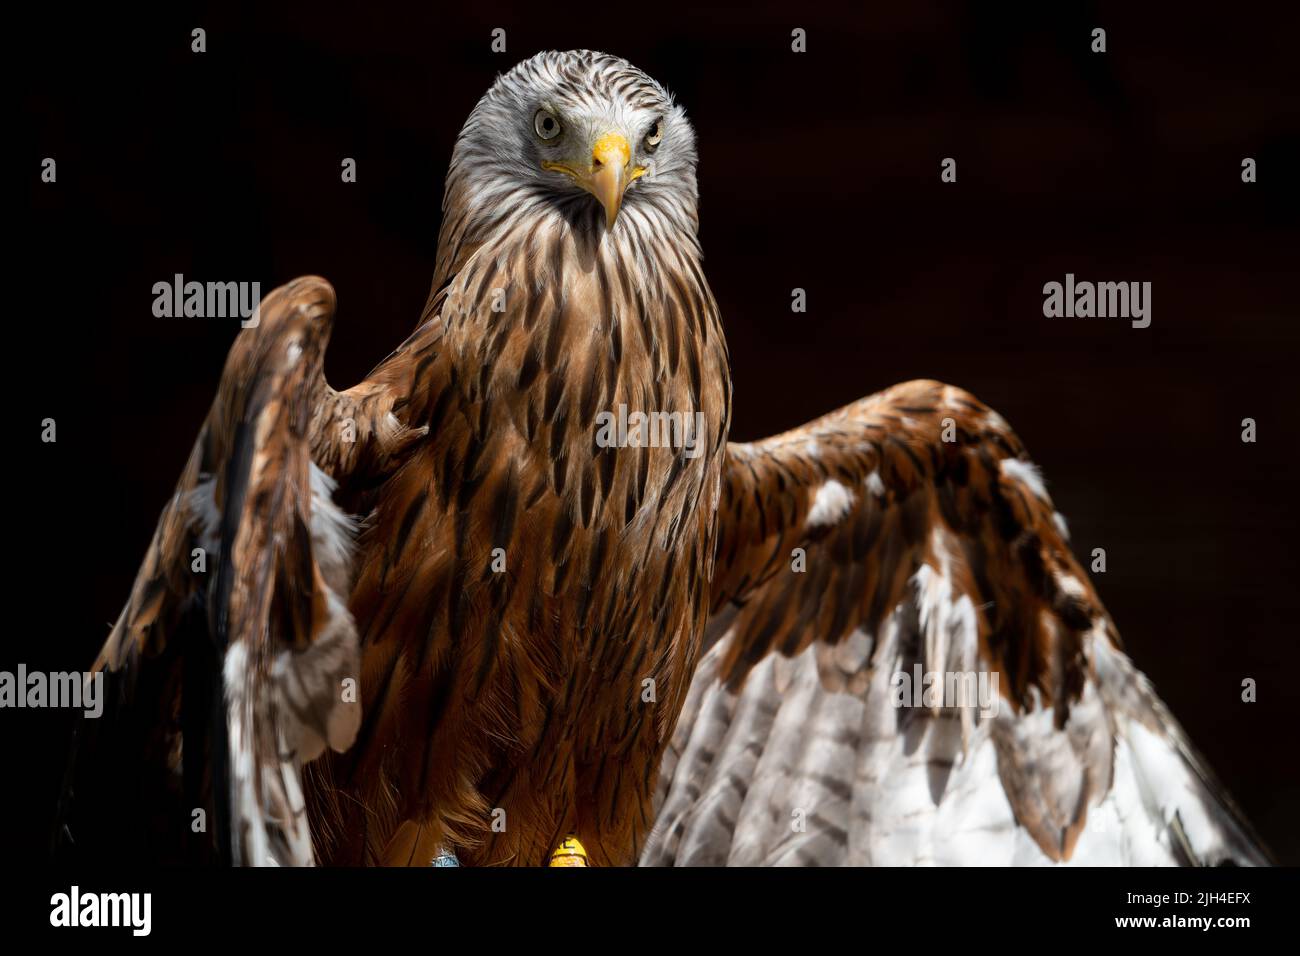 Captive Red kite (Milvus Milvus) with its wings out warming in the sun against a black background Stock Photo